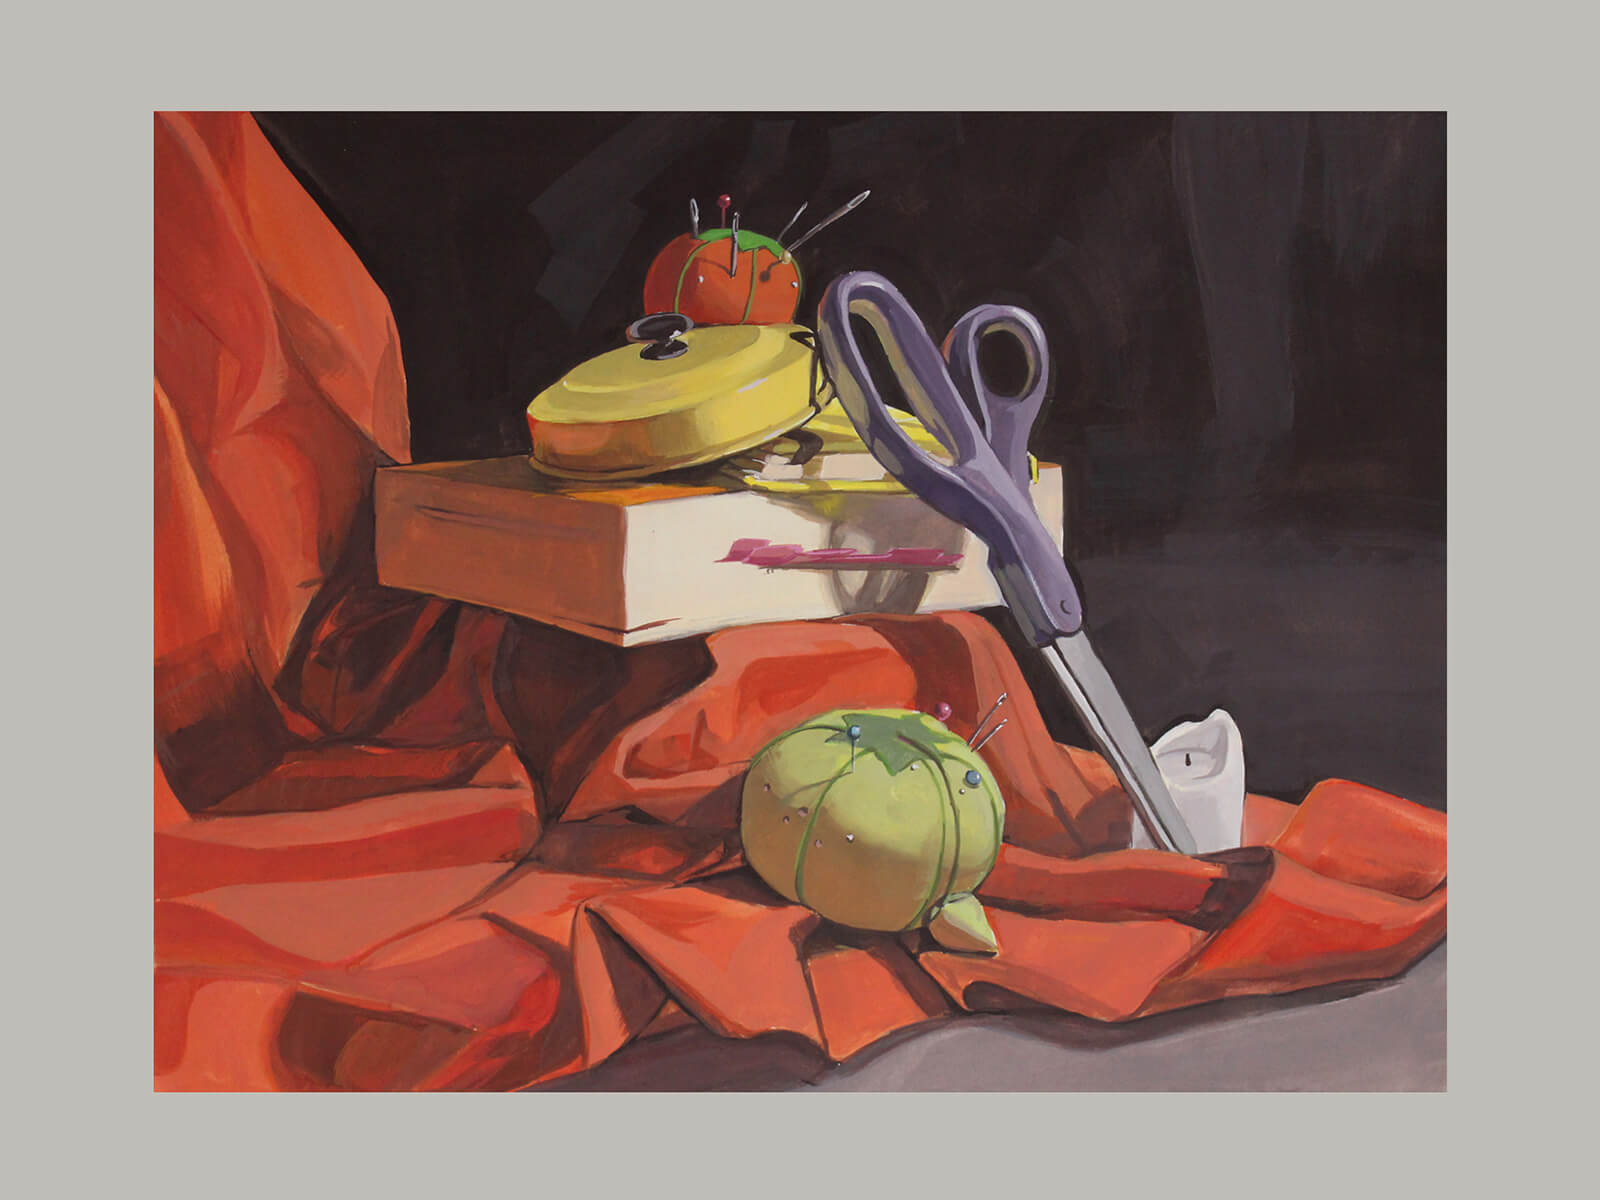 still-life traditional painting of pin cushions, a pair of scissors, a pot lid, books, and a candle on a red draped sheet